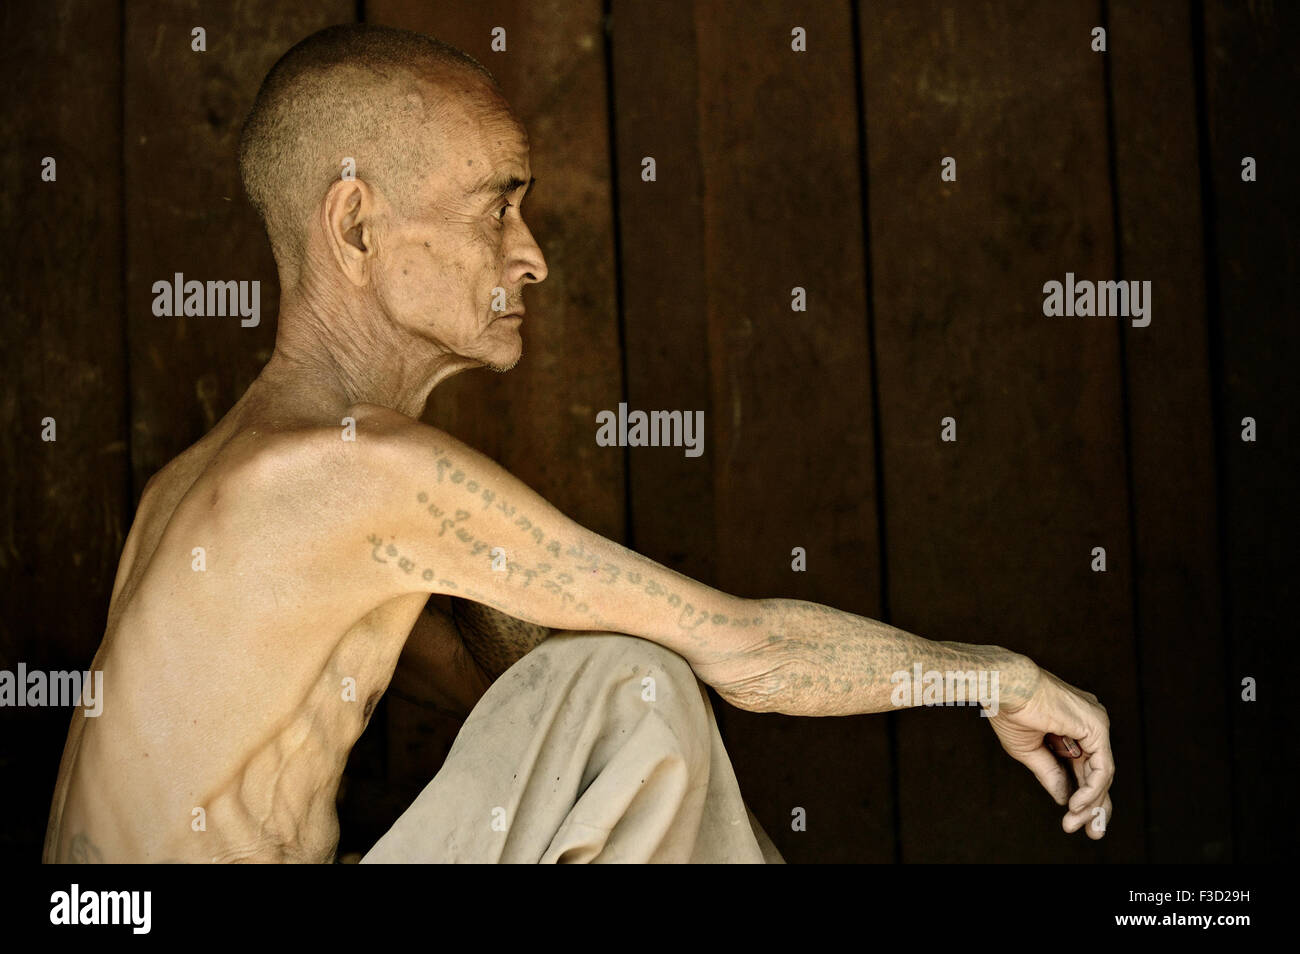 Skinny tattooed man of the Loi tribe sitting inside his wooden house in the village of Wun Nyat, Shan State, Myanmar Stock Photo